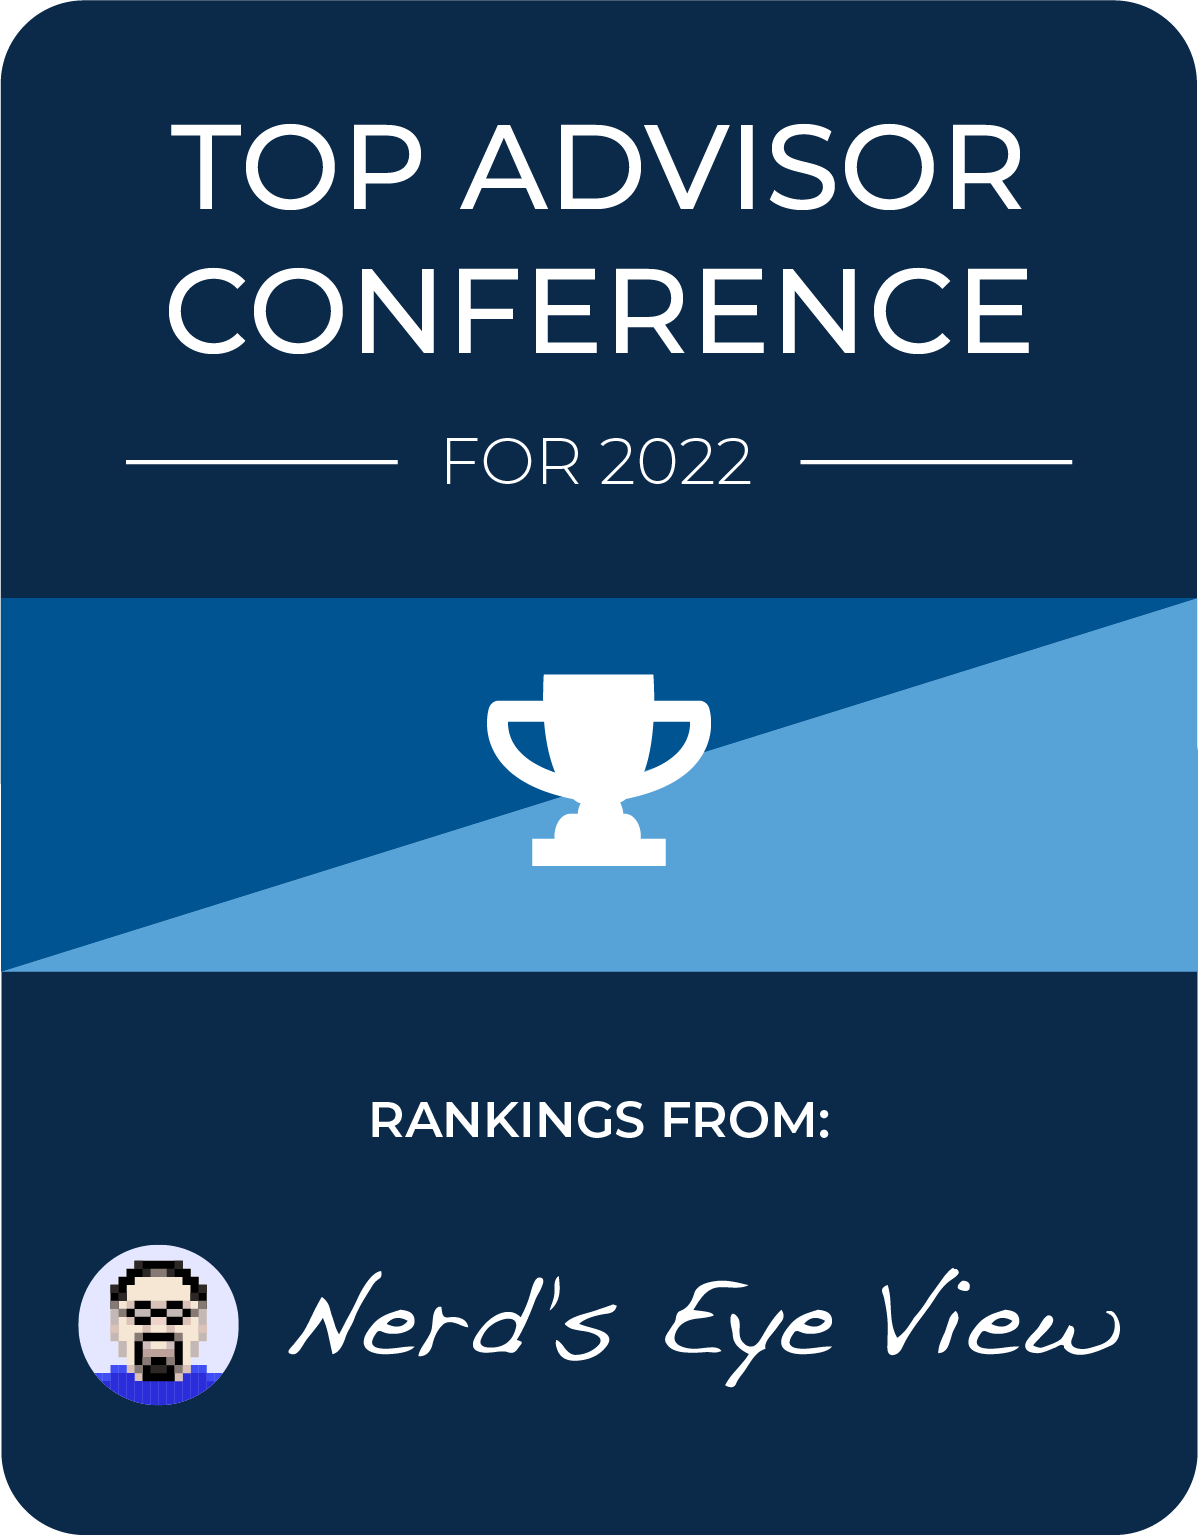 Best Conferences For Top Financial Advisors in 2022 - Rankings From Nerd's Eye View